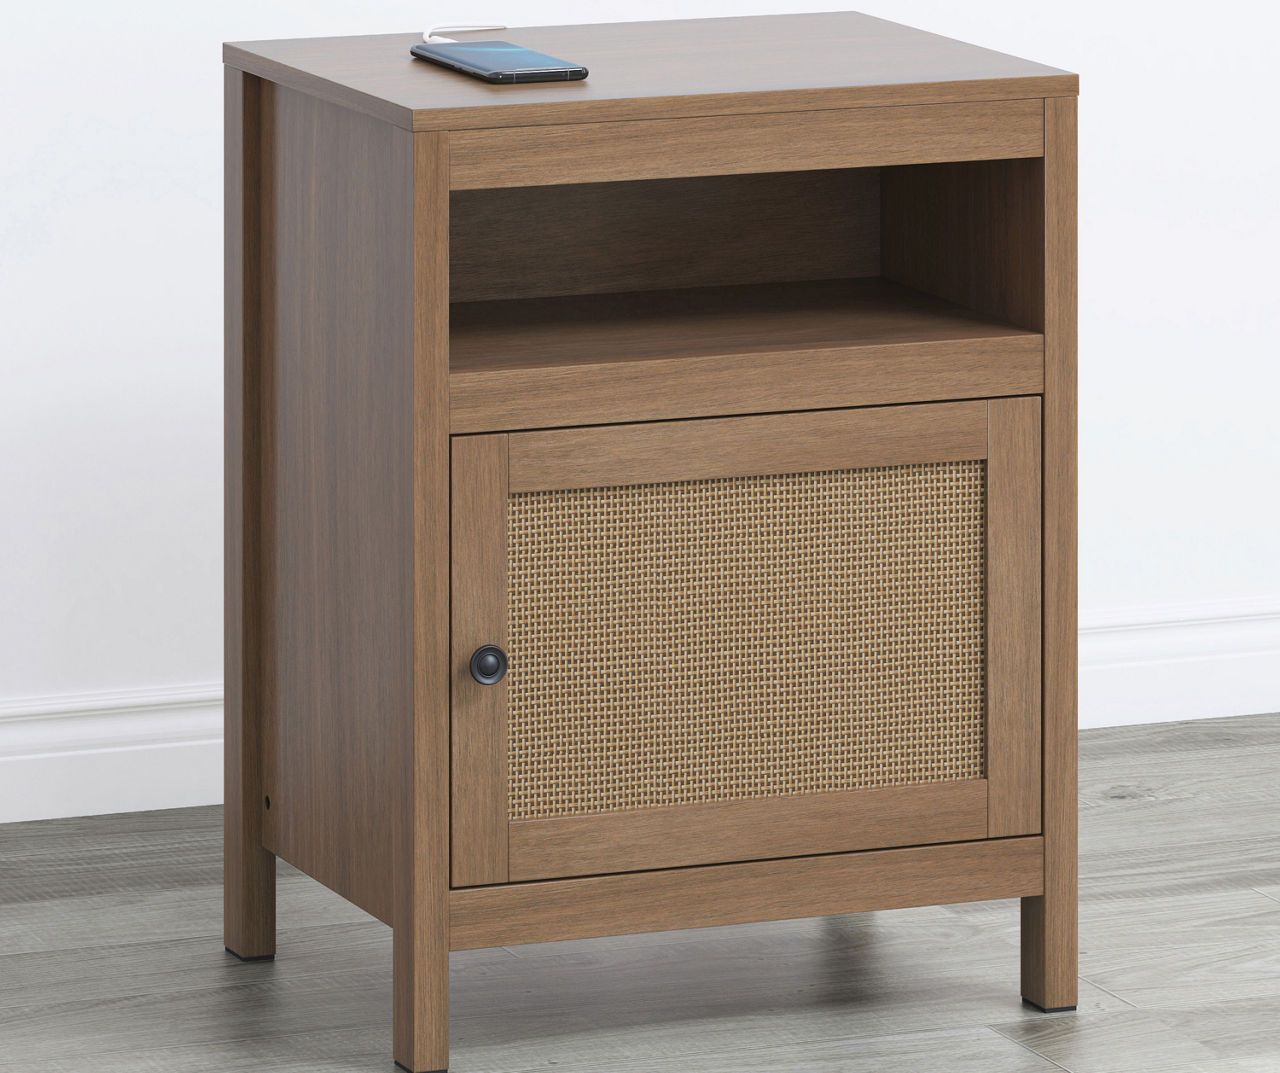 Villa Park Acorn Brown Cane Door End Table with Outlets & USB Charging